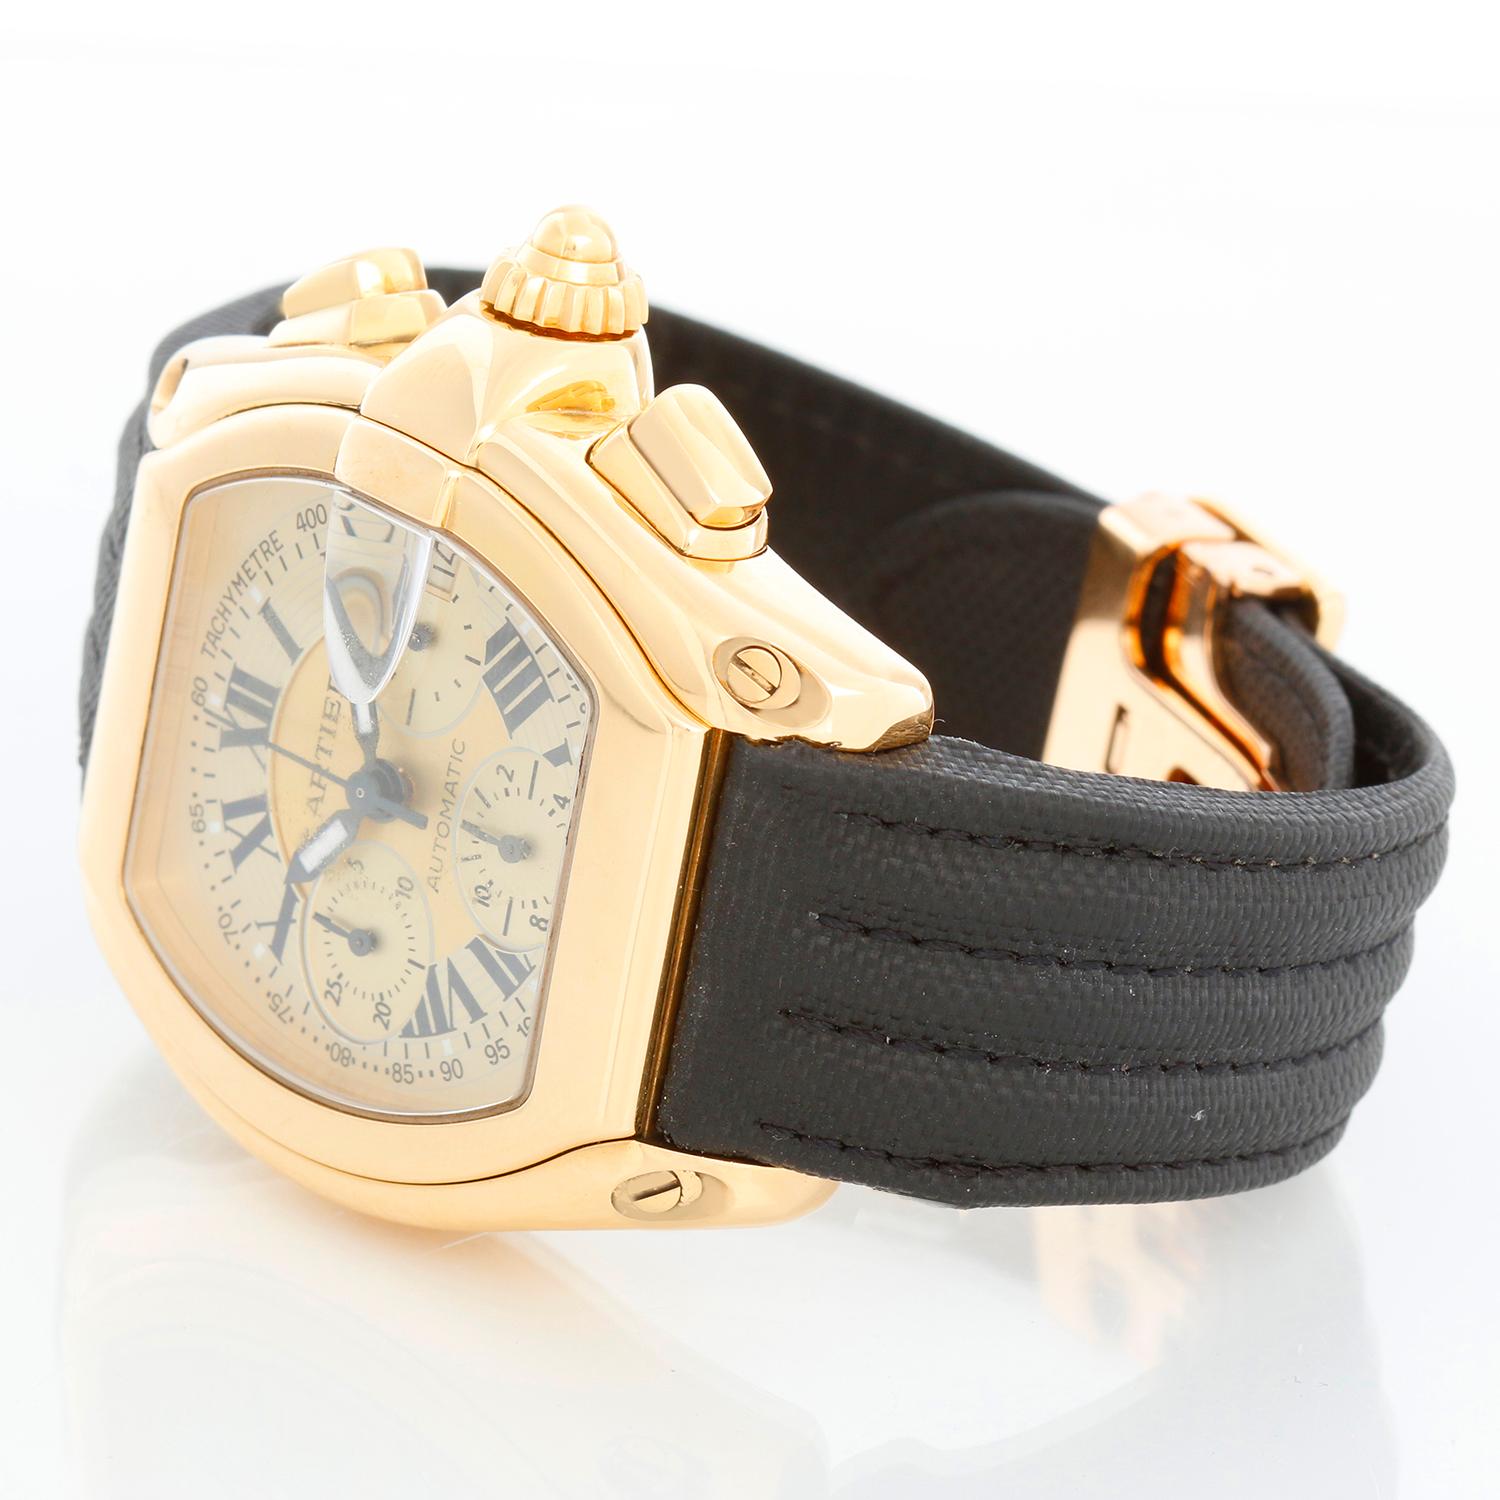 Cartier Roadster Chronograph 18k Yellow Gold Men's Watch 2619 - Automatic winding; chronograph with date. 18k yellow gold case (43 mm x 47mm). Champagne dial with Roman numerals . Black strap with 18K Yellow gold Cartier deployant clasp . Pre-owned